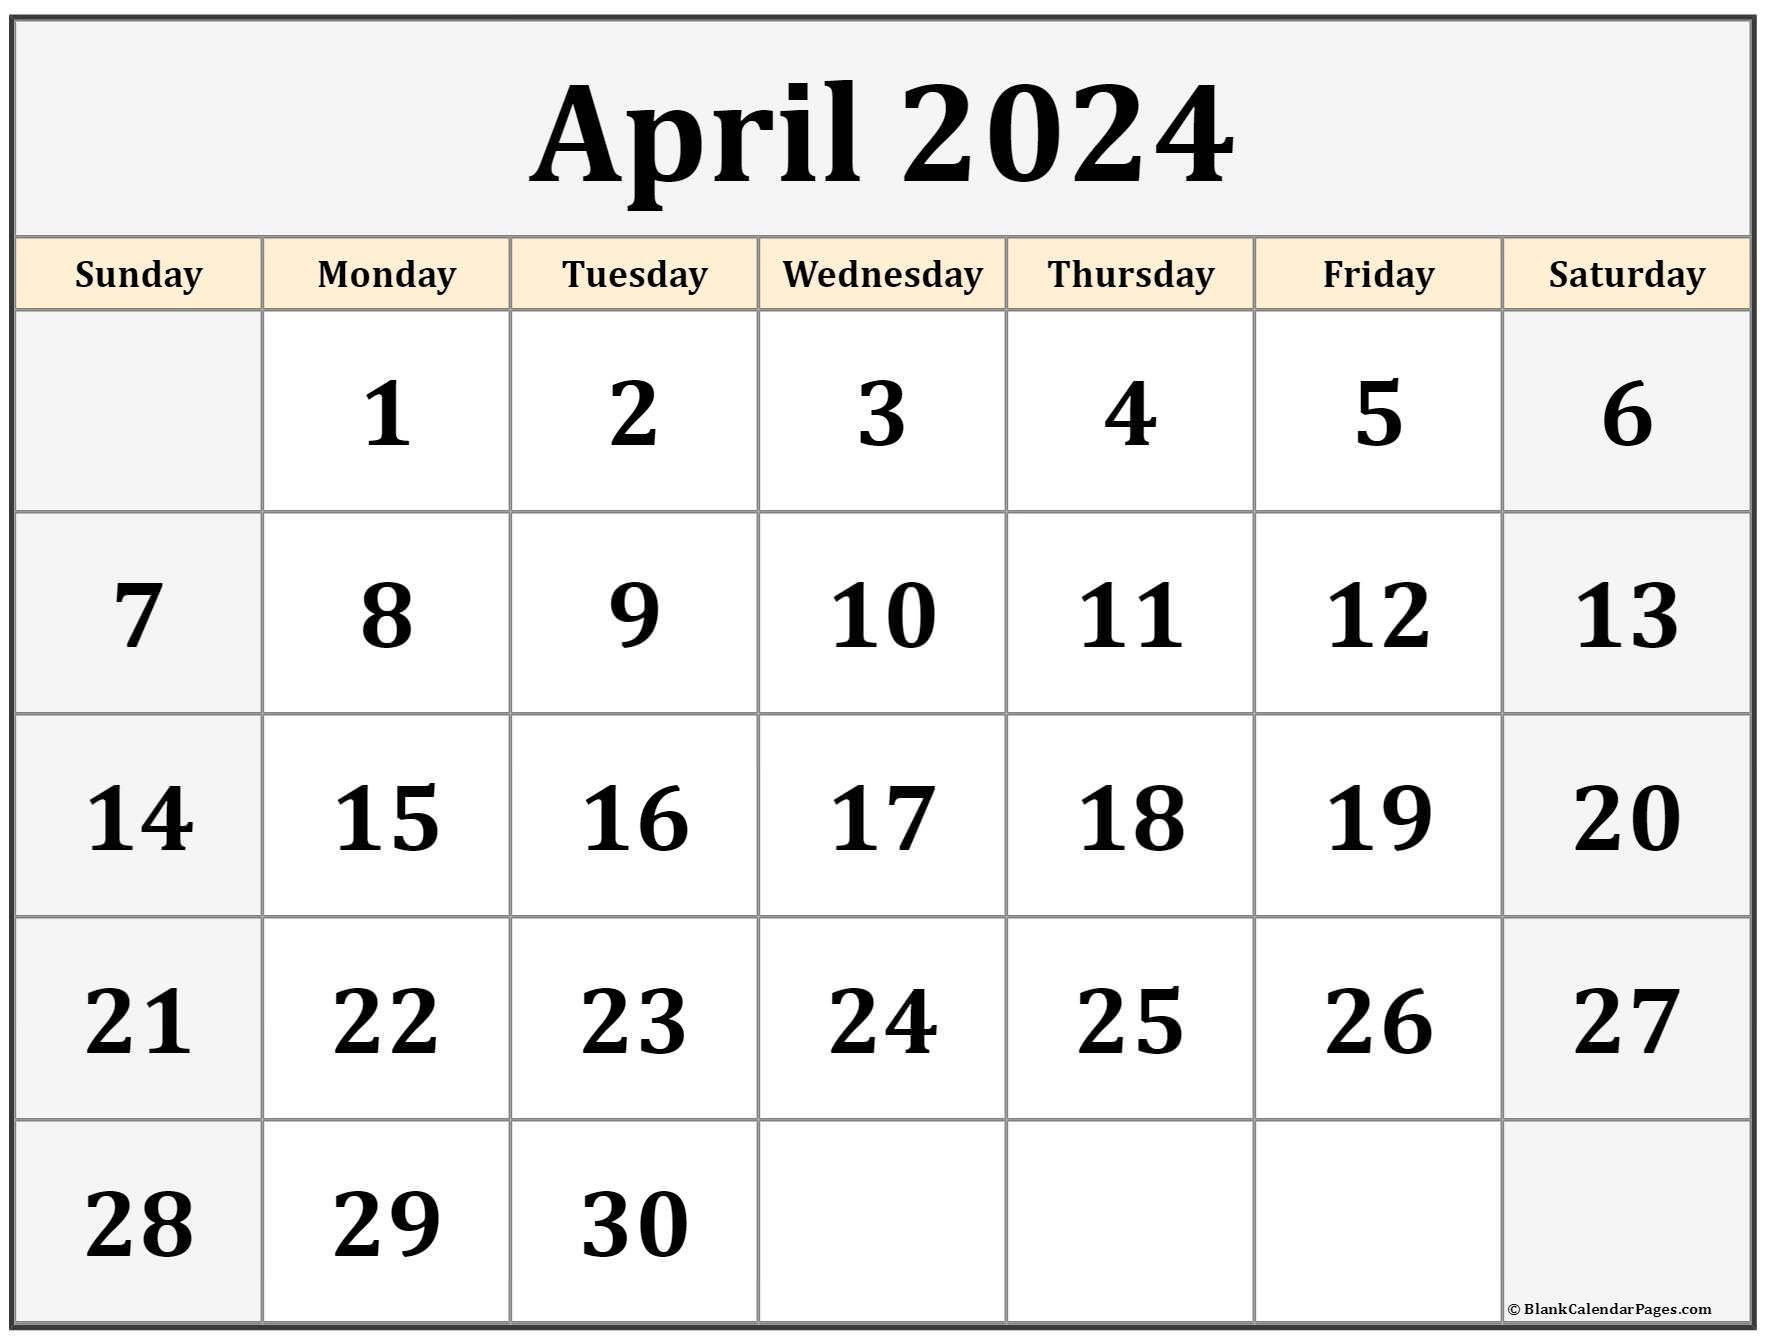 April 2024 Calendar Of The Month Free Printable April Calendar Of The - Free Printable Calendar 2024 April May